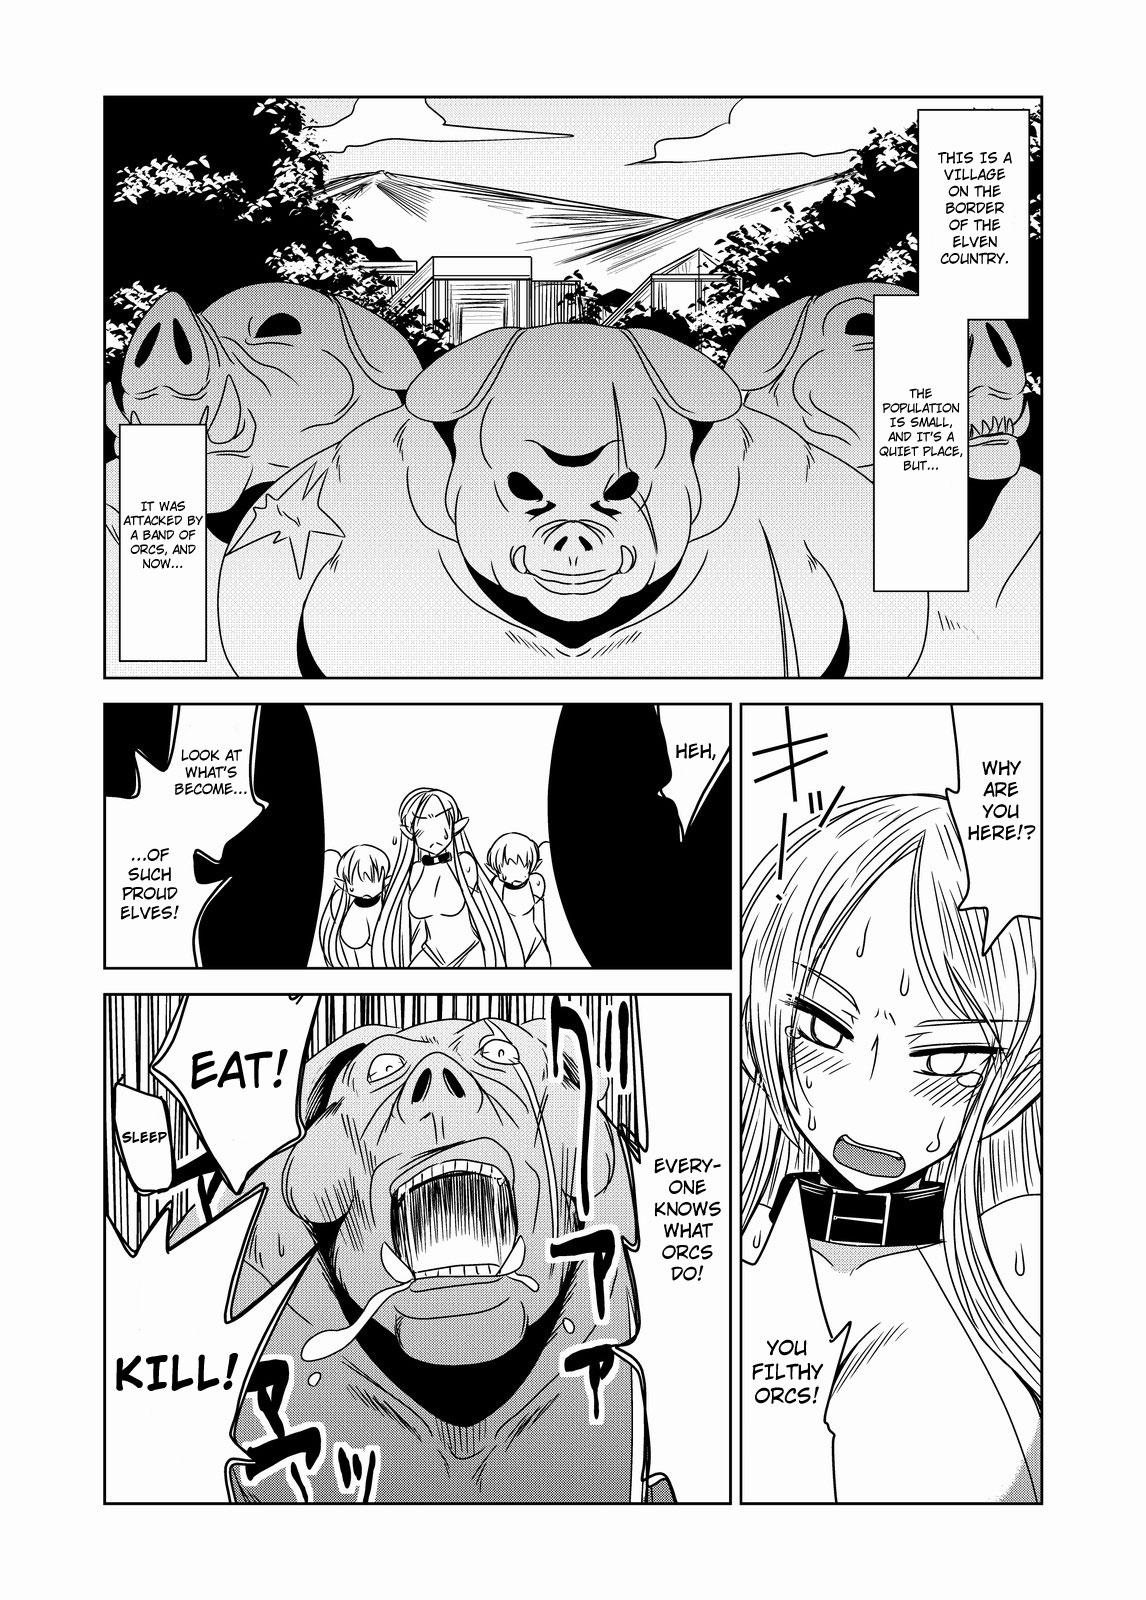 Sologirl Orc Dakara Elf Osotta Zenin Succubus Datta wa. | We Assaulted Some Elves Because We're Orcs But It Turns Out They Were All Actually Succubi Teensex - Page 3